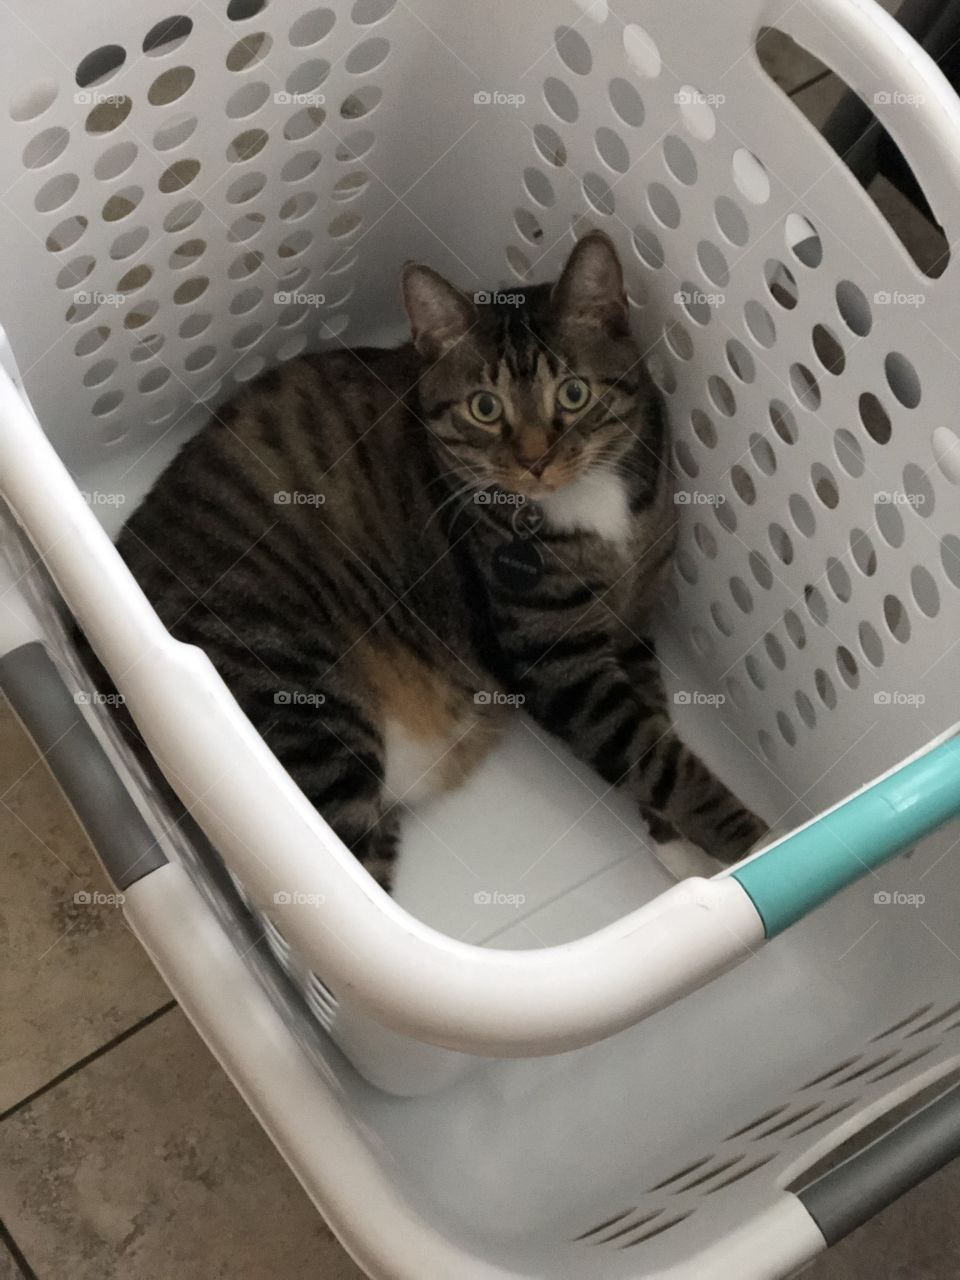 Max the Manx loves baskets 🧺